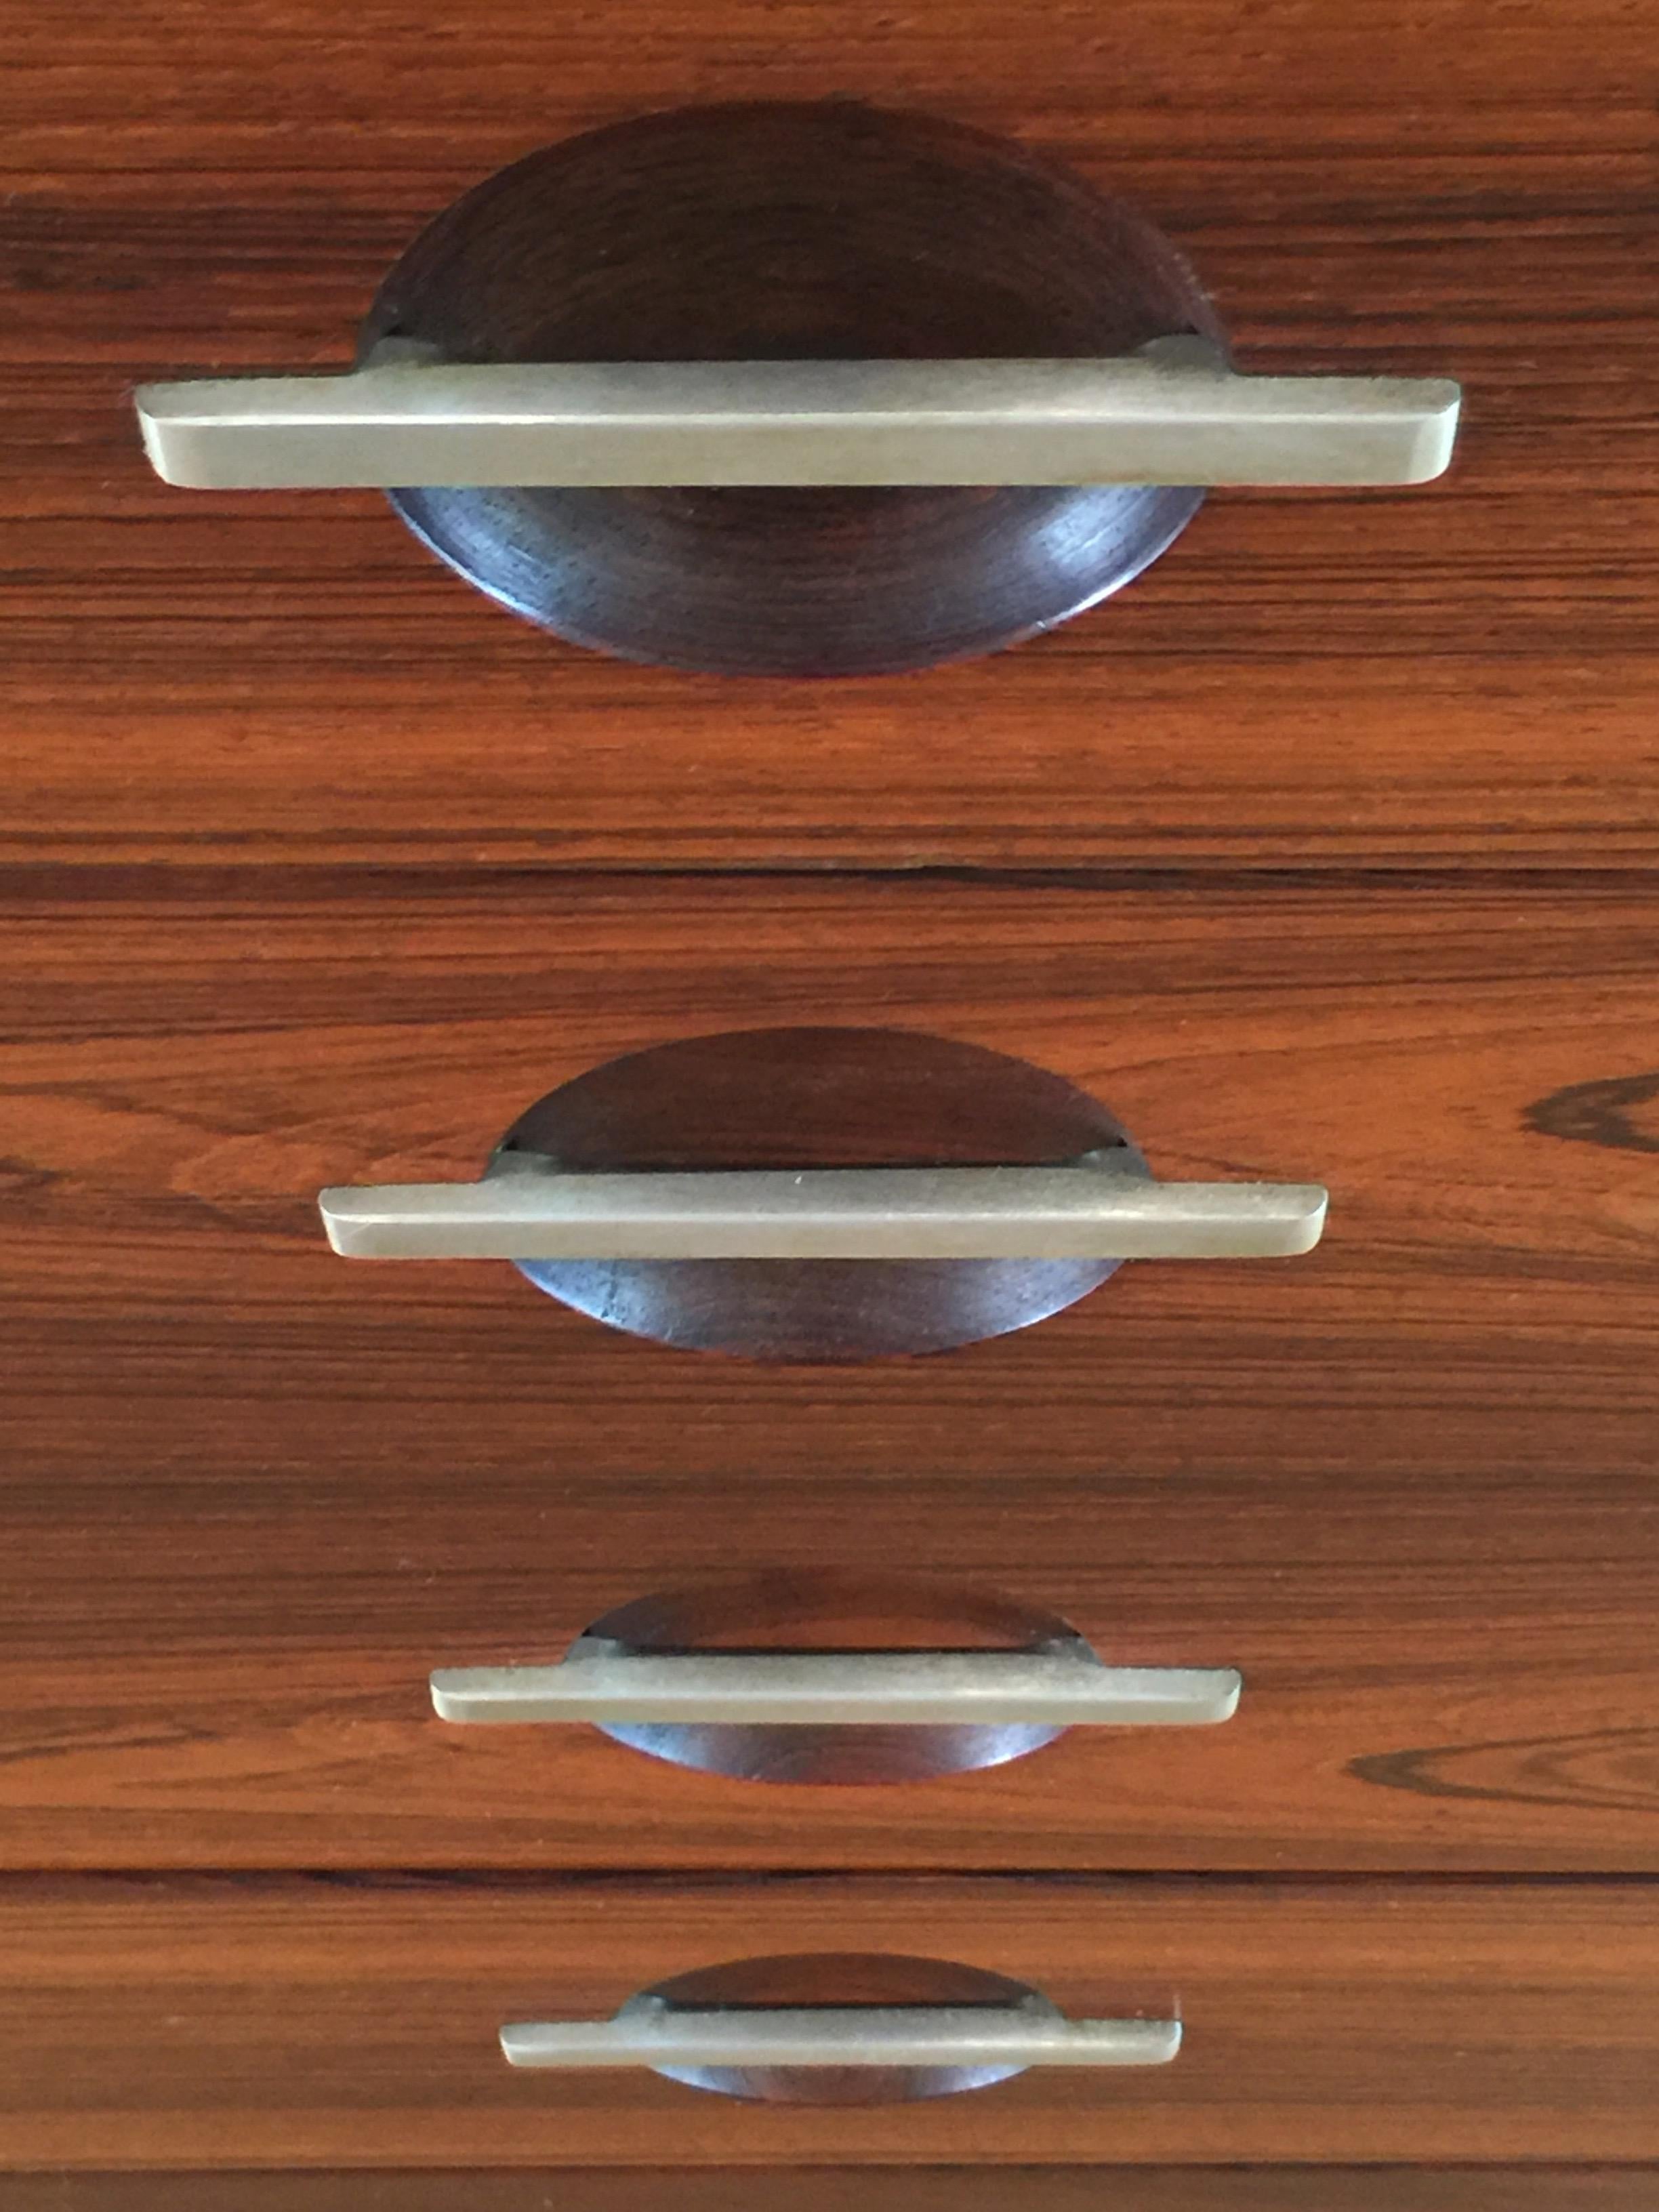 An exceptionally handsome chest of drawers in polished palisander contrasting with brushed stainless steel mounts. The drawer pulls are brushed steel across recessed hemispheres, and the stainless steel legs terminate in palisander 'feet'.

Illus.